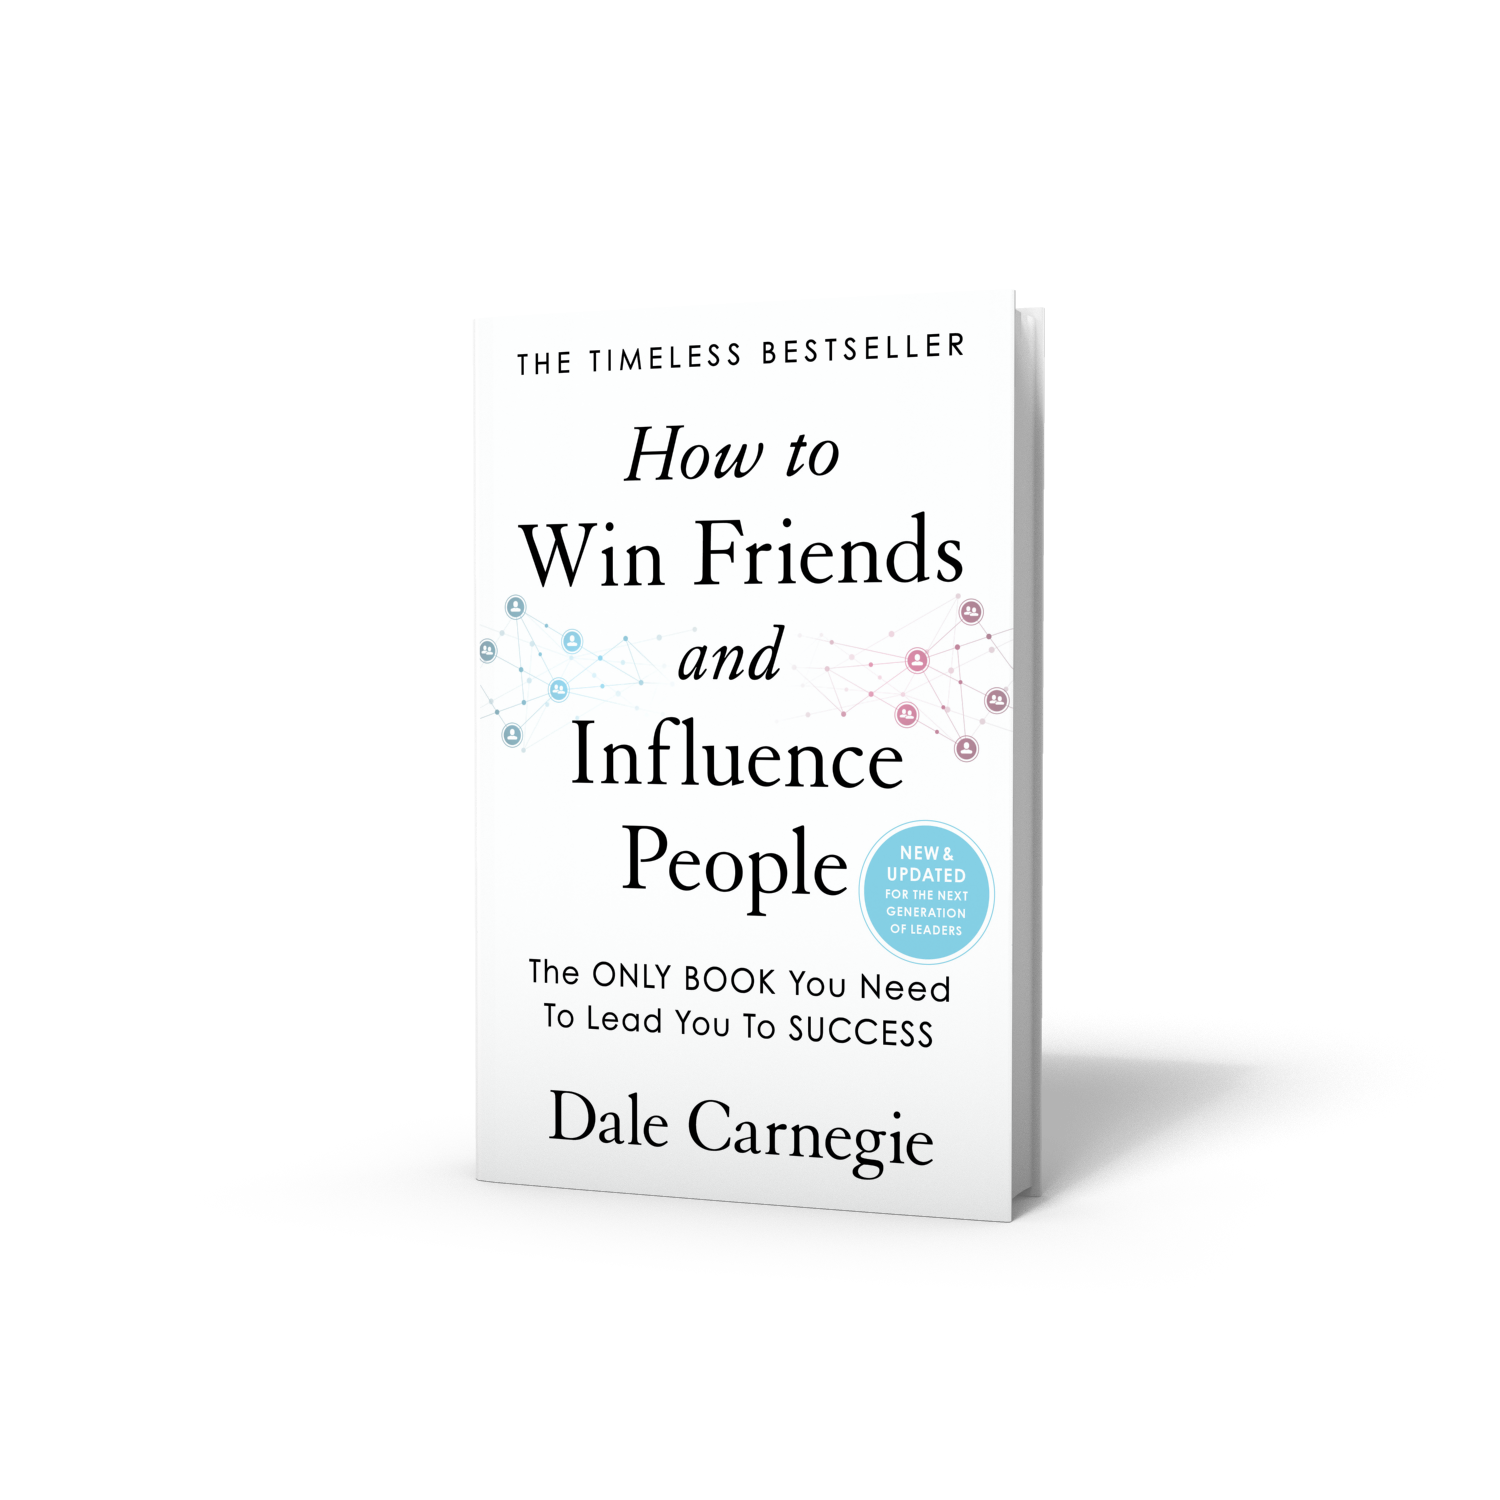 Presentation on dale carnegie how to win friends and influence